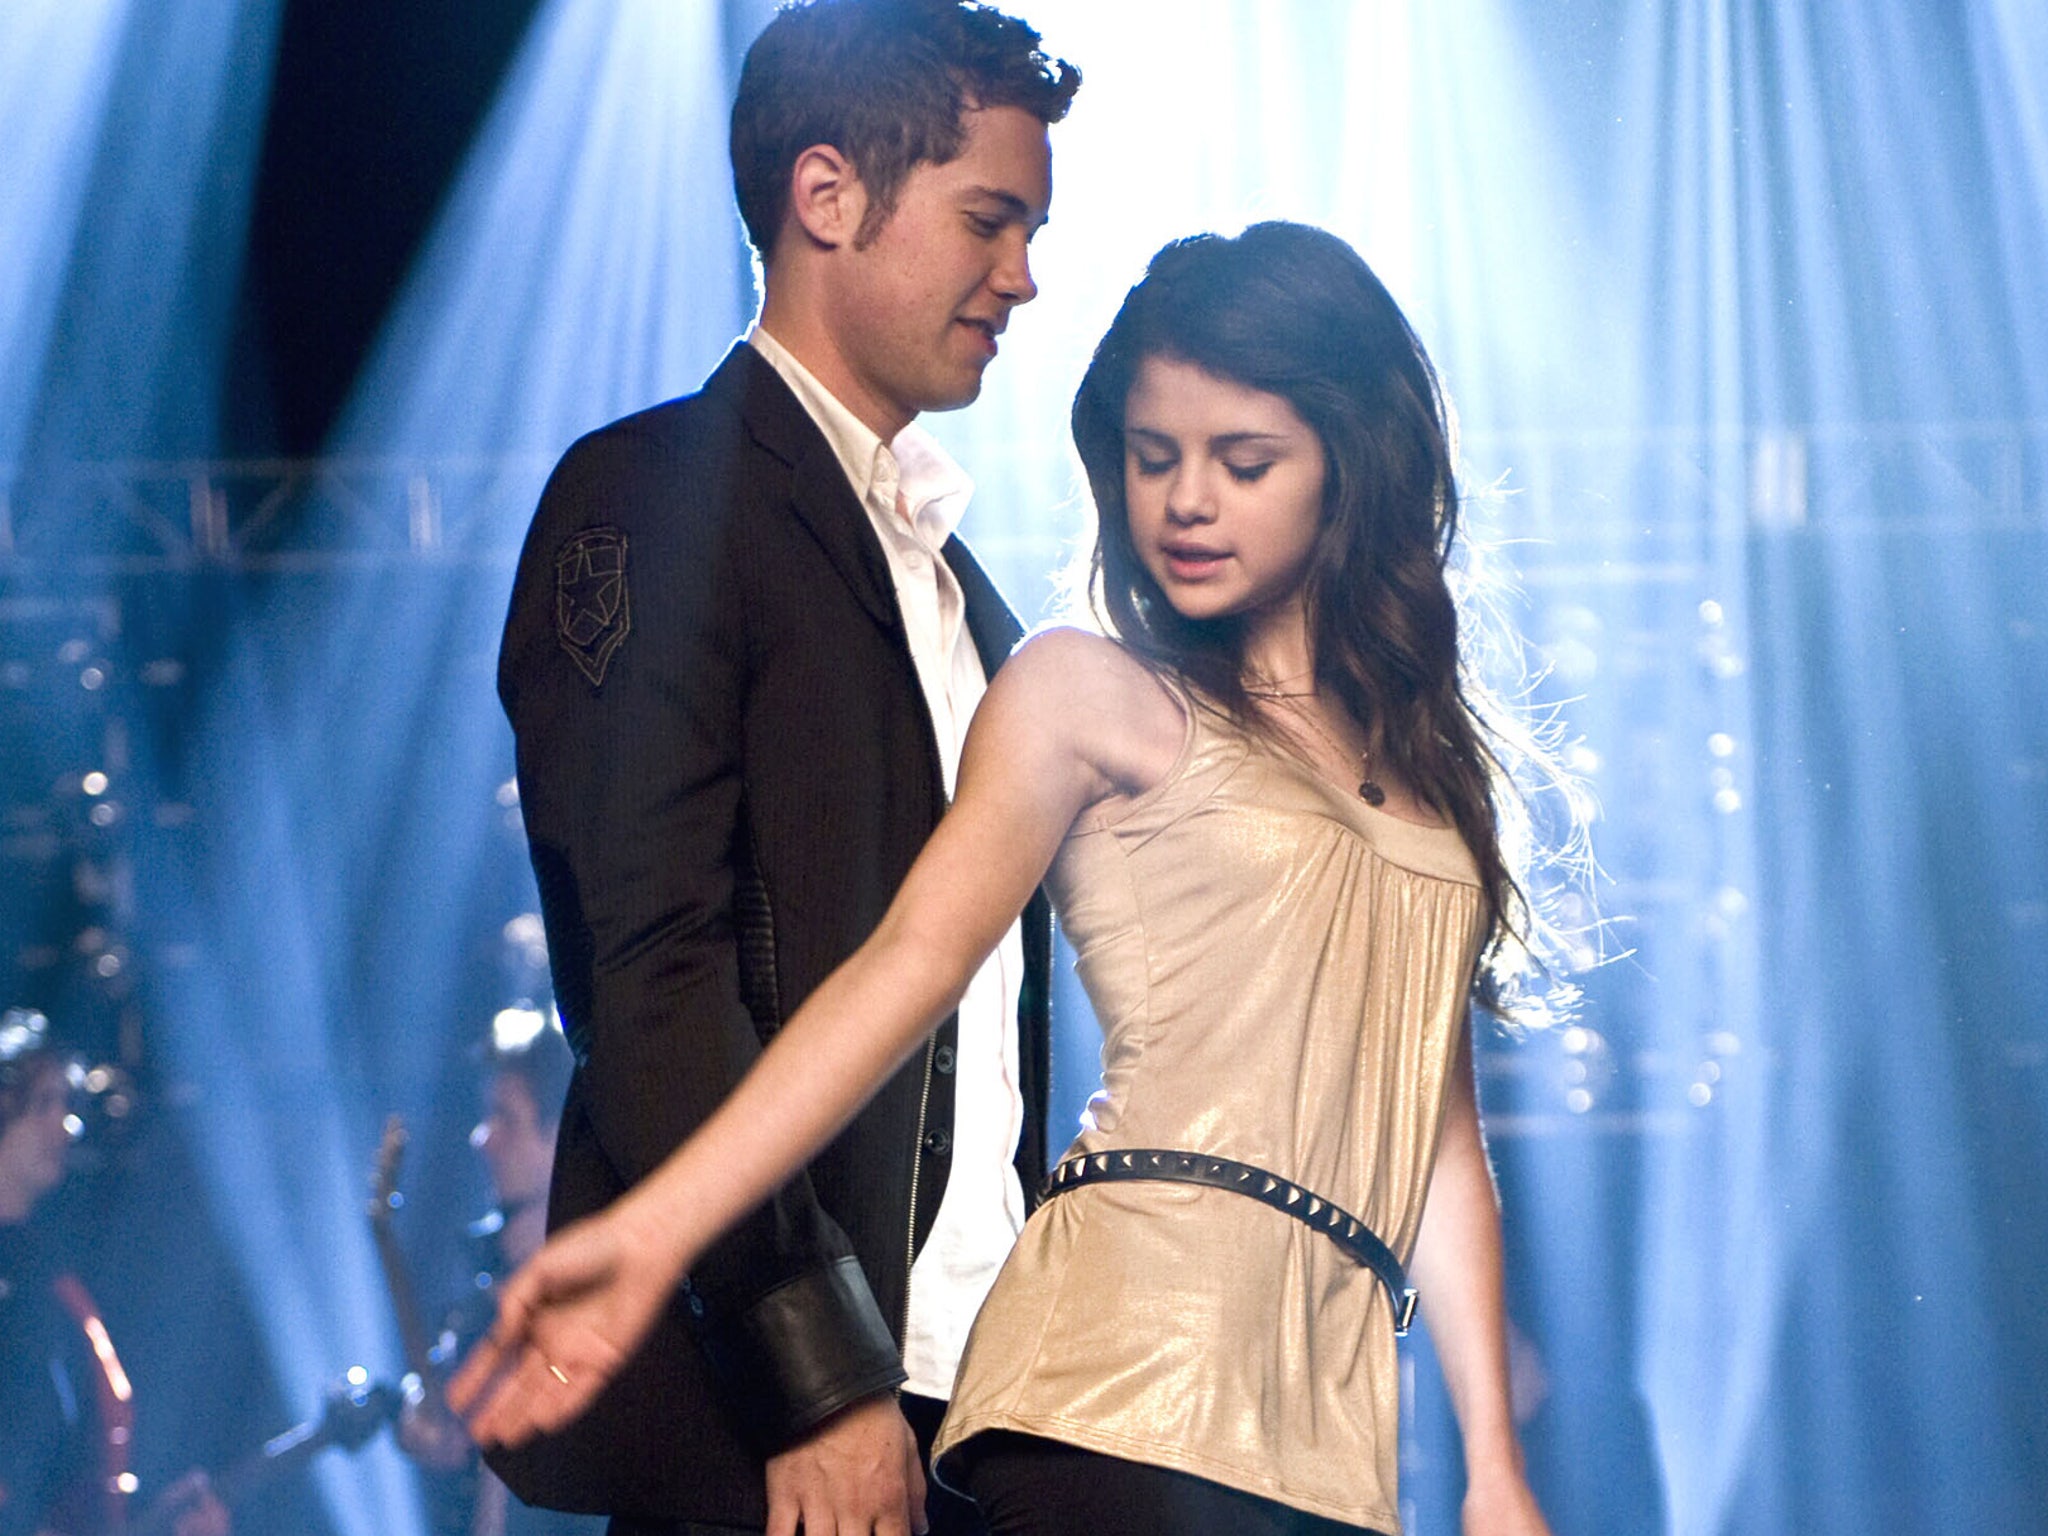 Life's Work: Another Cinderella Story Review